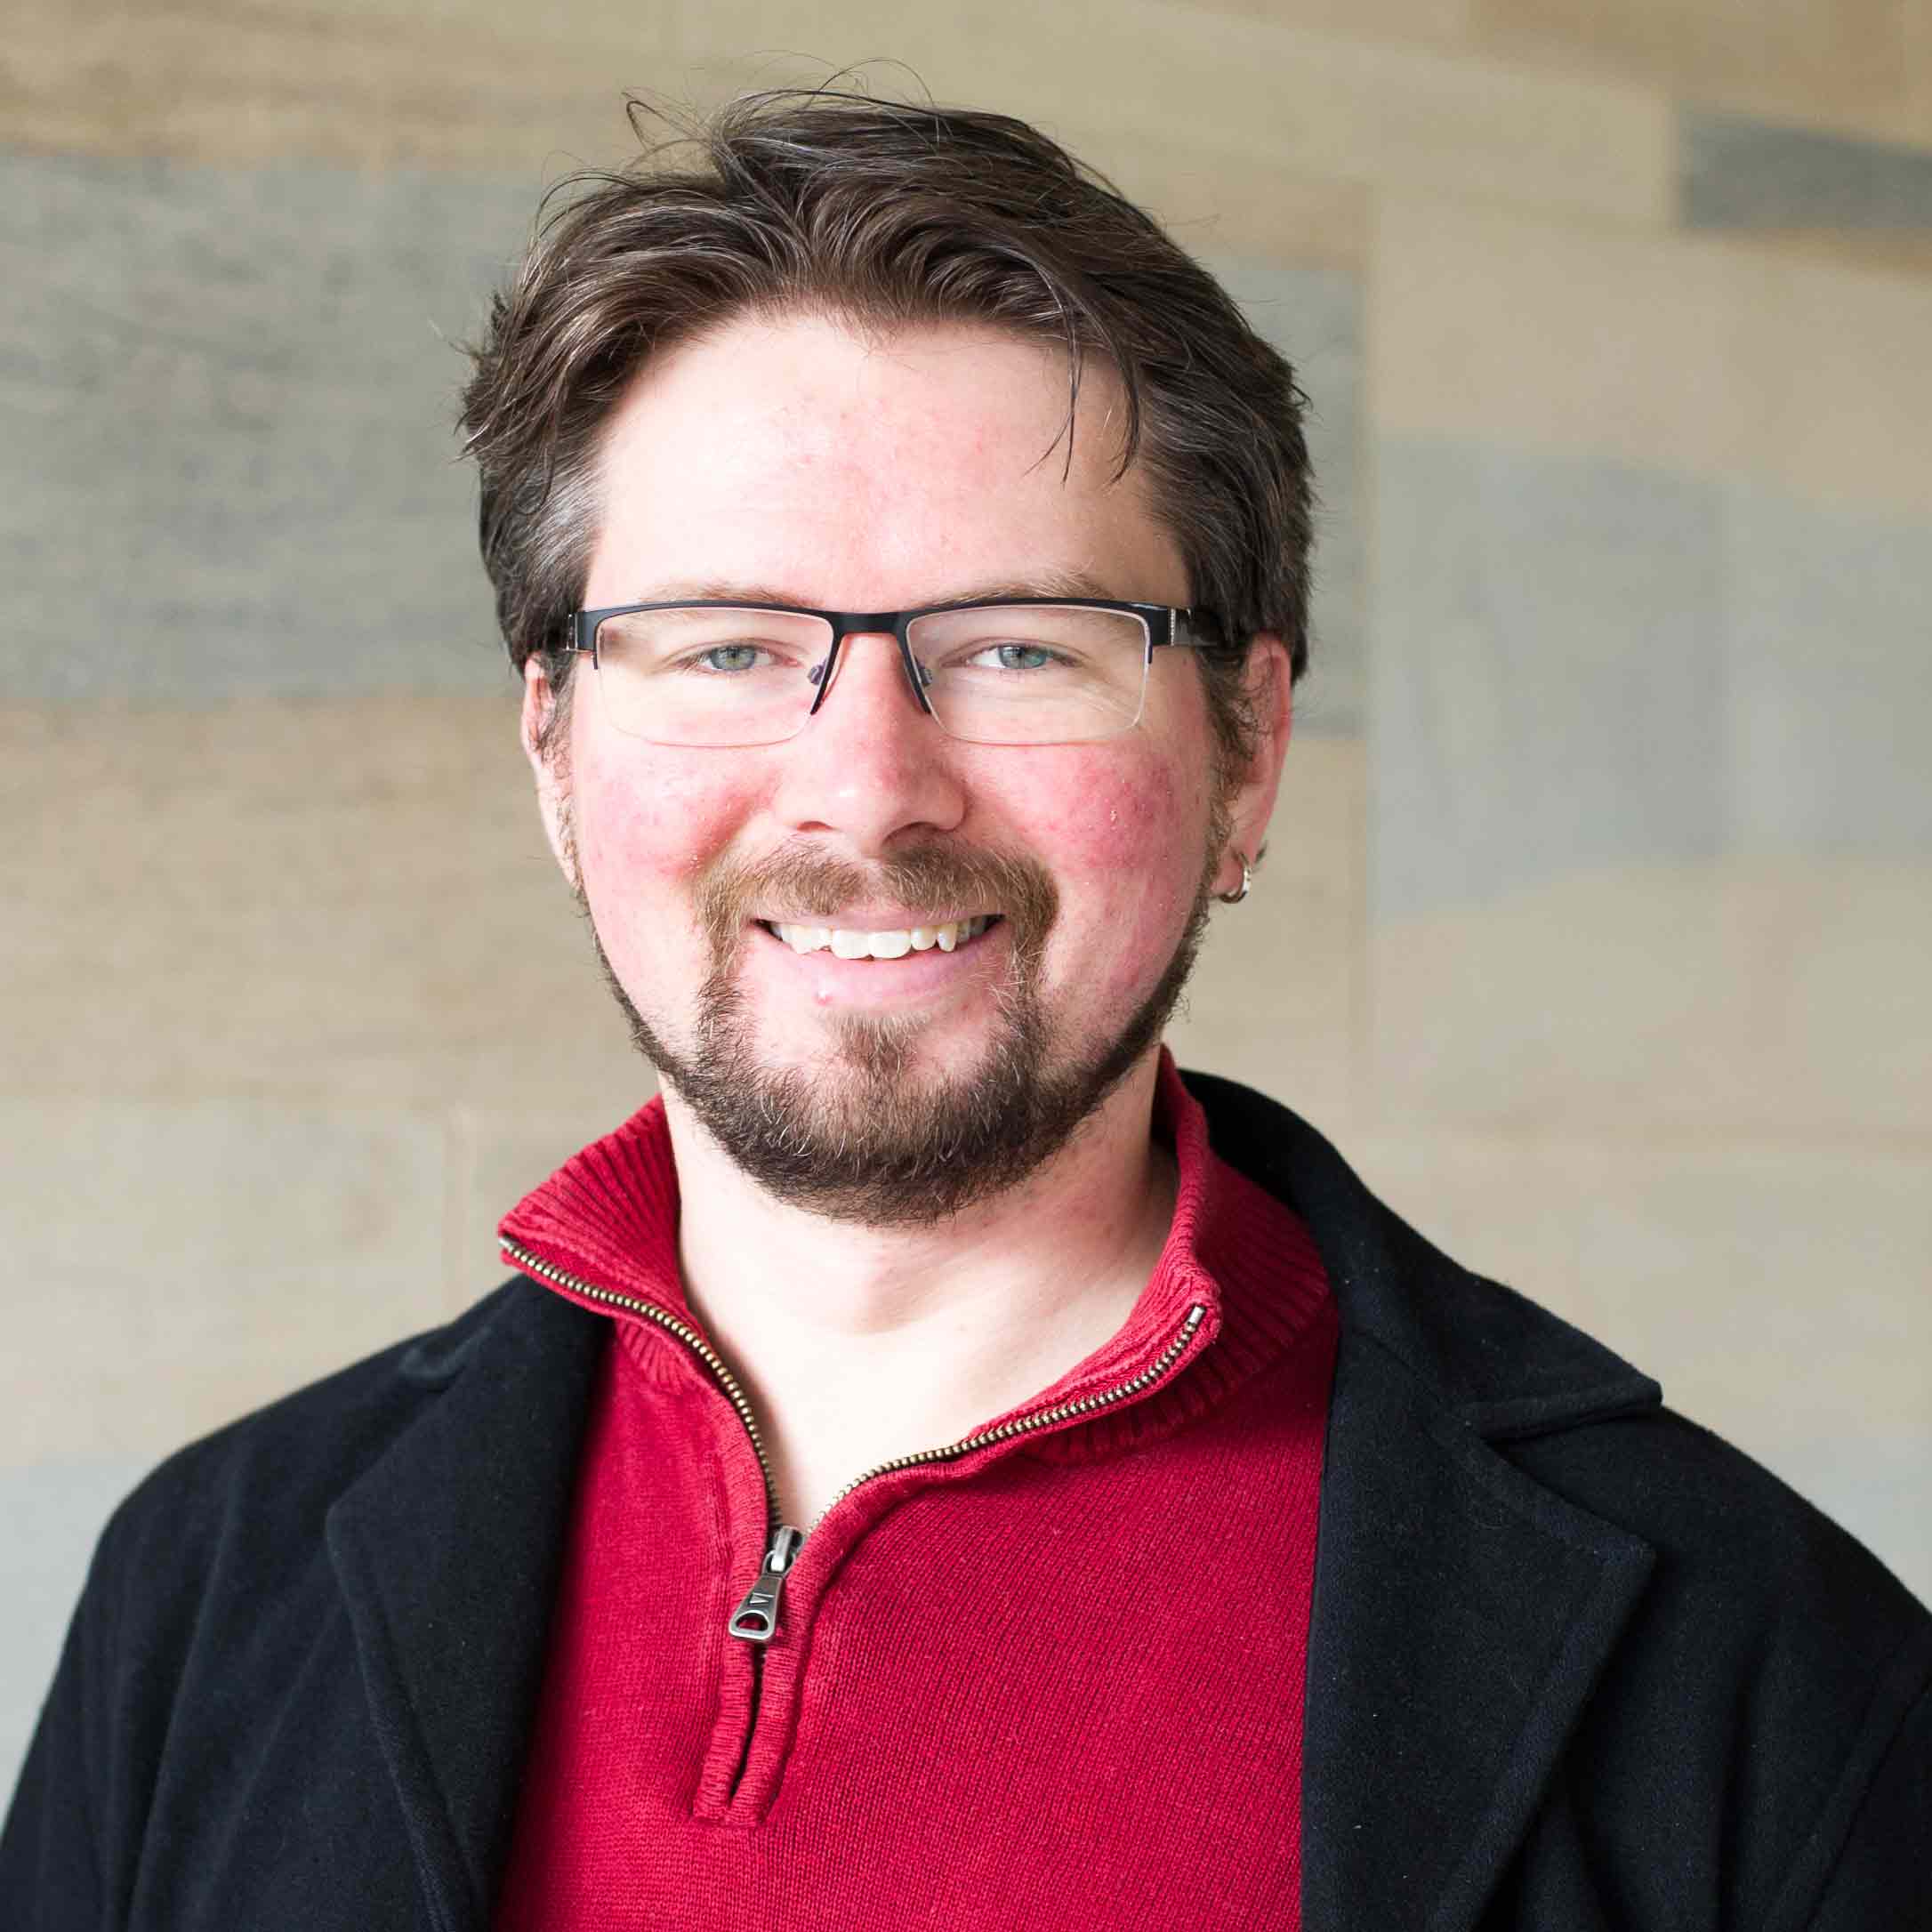 Dr Liam Jarvis, smiling, wearing glasses, and wearing a red top under a black jacket